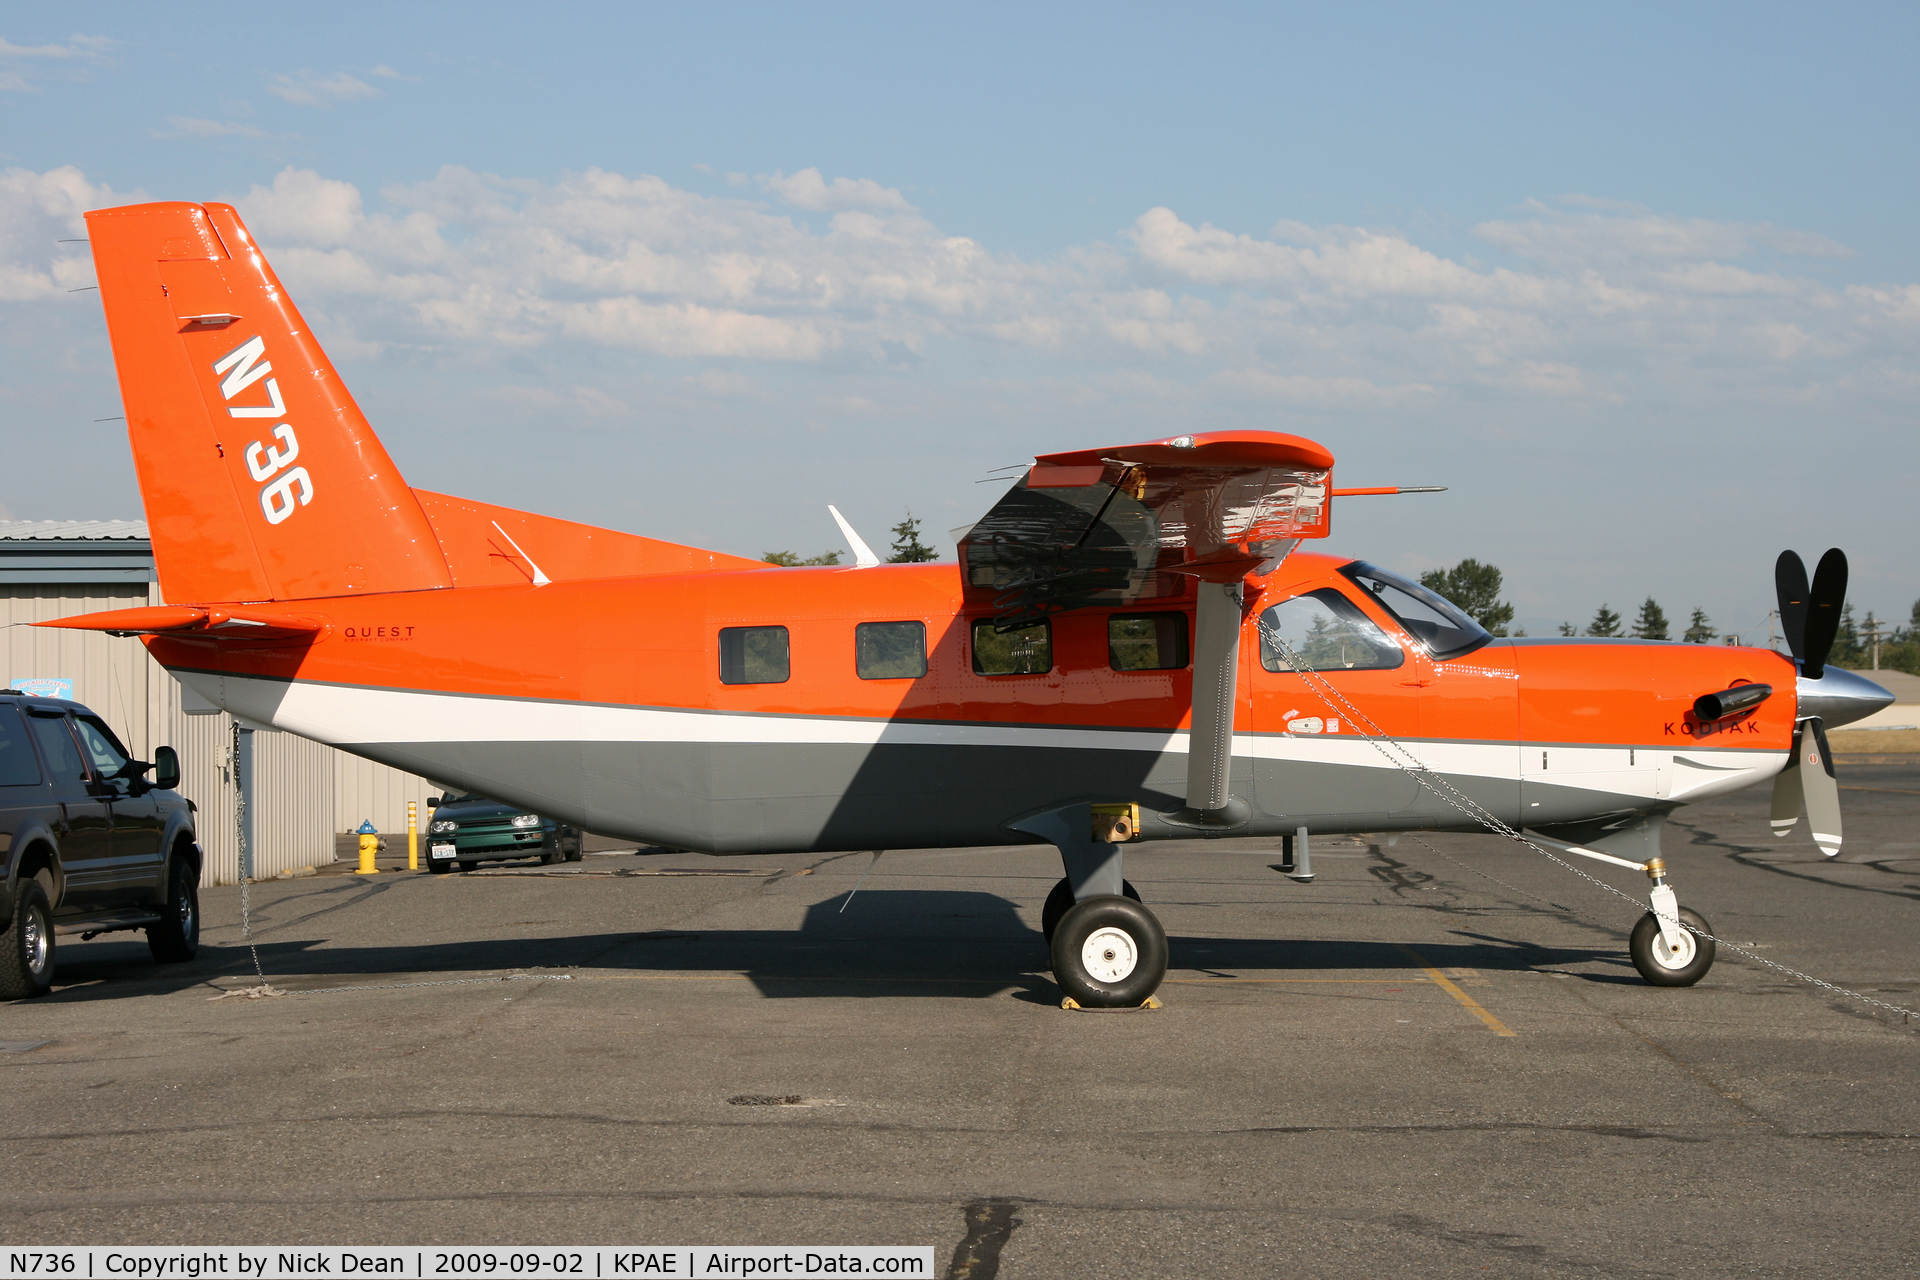 N736, 2009 Quest Kodiak 100 C/N 100-0019, KPAE One of the nicest lookoing Q100's to come out of paint so far.